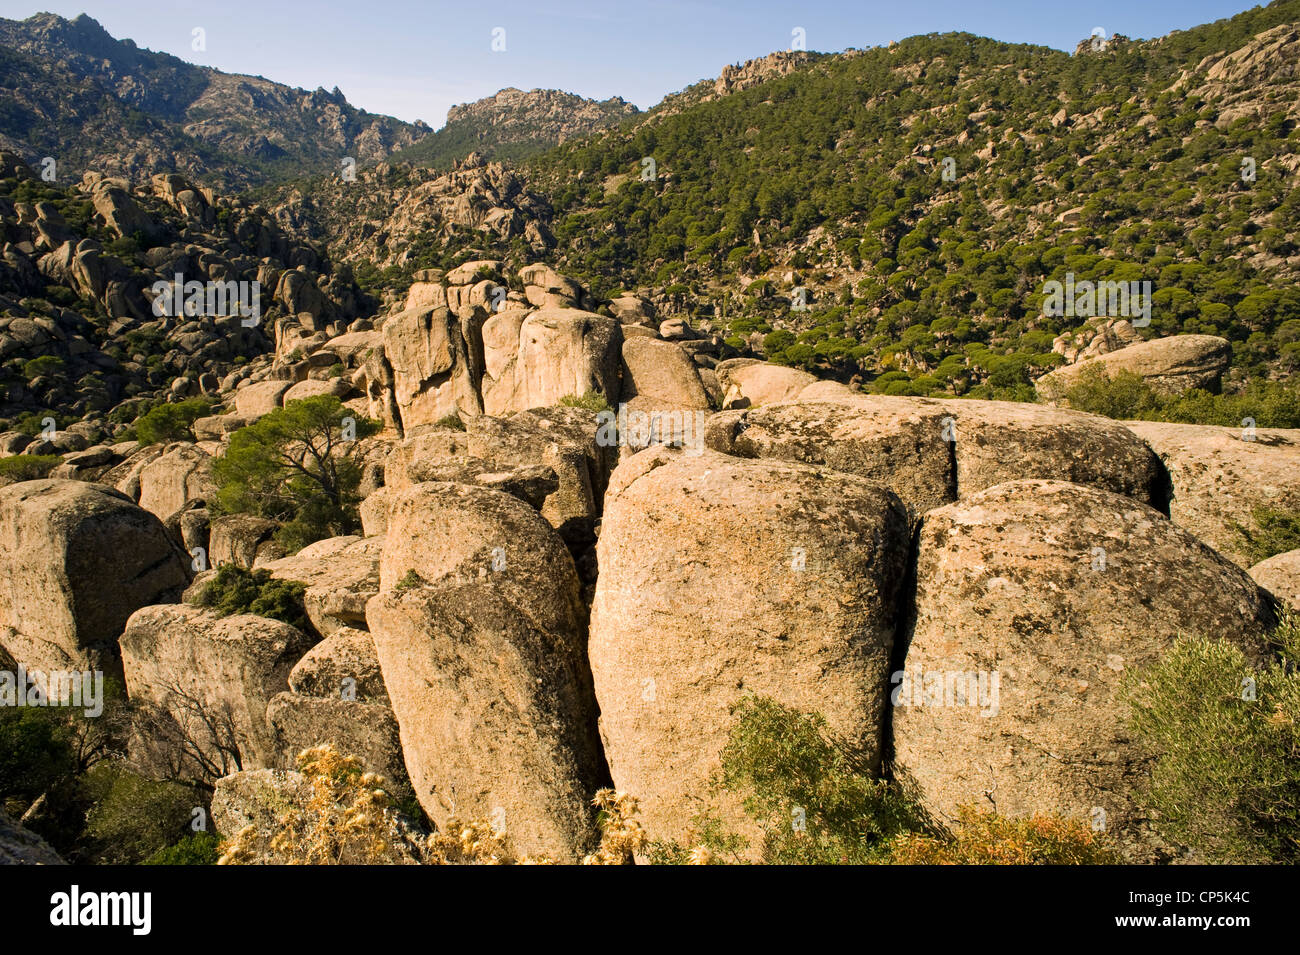 Rocky landscape and stone pine forest in Besparmak Mountains Turkey Stock Photo